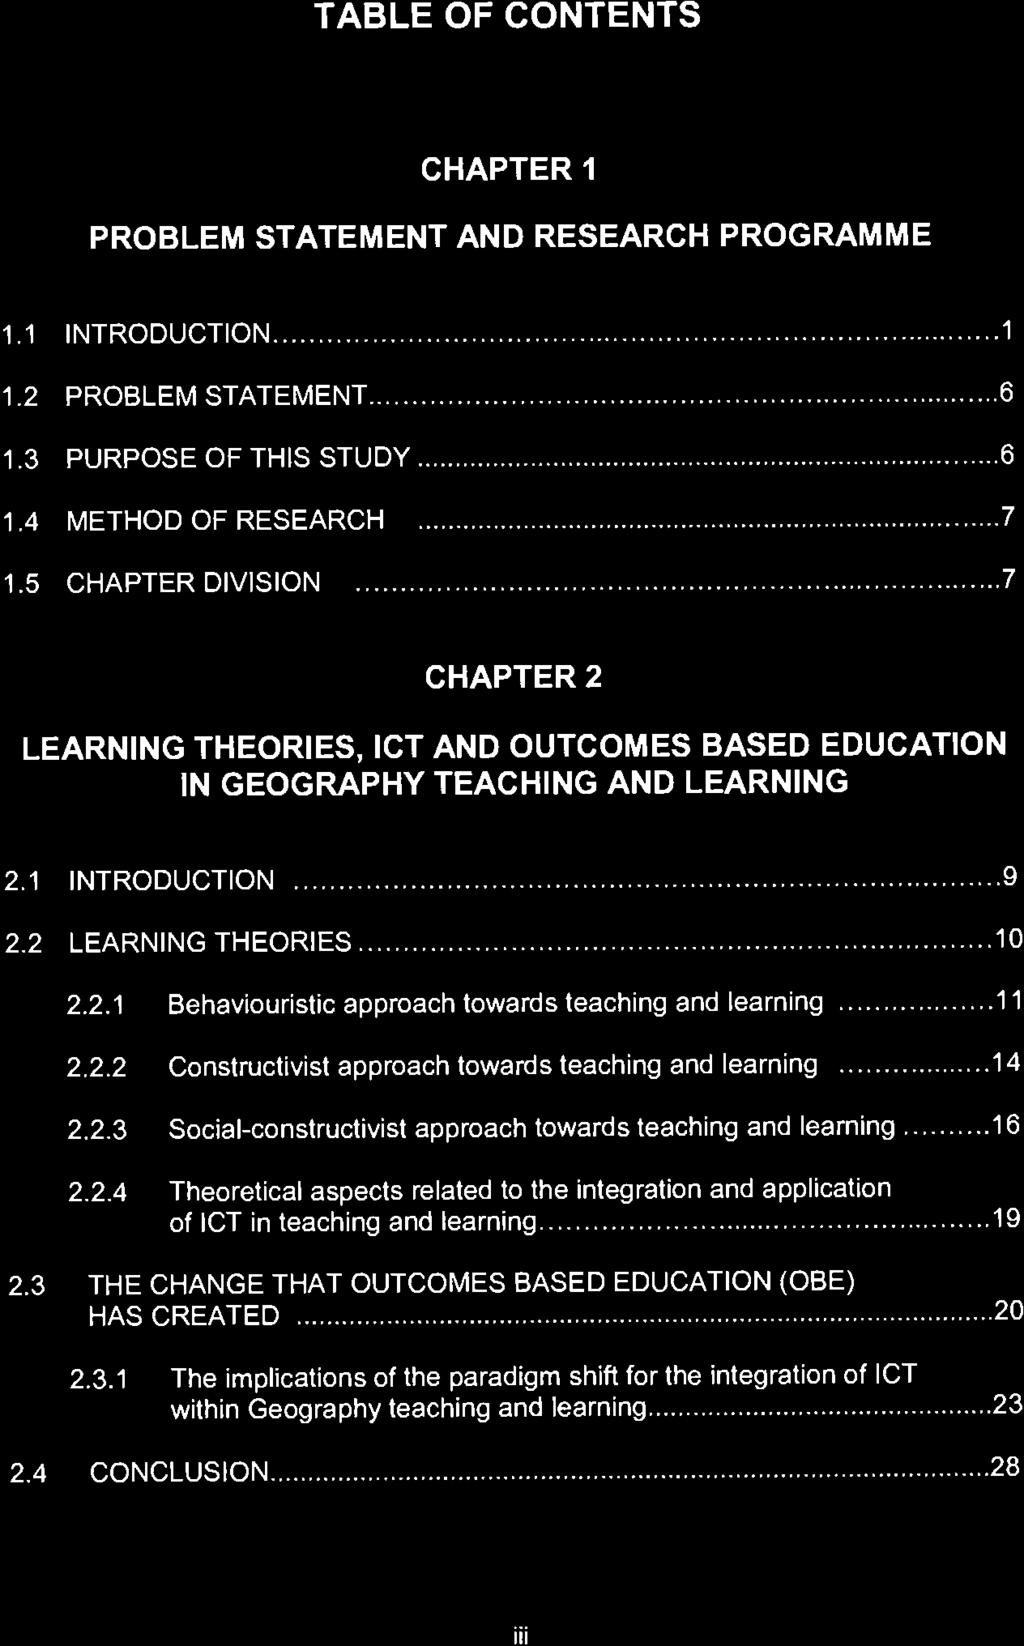 TABLE OF CONTENTS CHAPTER I PROBLEM STATEMENT AND RESEARCH PROGRAMME 1.I INTRODUCTION.... -1 1.2 PROBLEM STATEMENT... 6 1.3 PURPOSE OF THIS STUDY... ;... :6 1 '4 METHOD OF RESEARCH... 7 1.